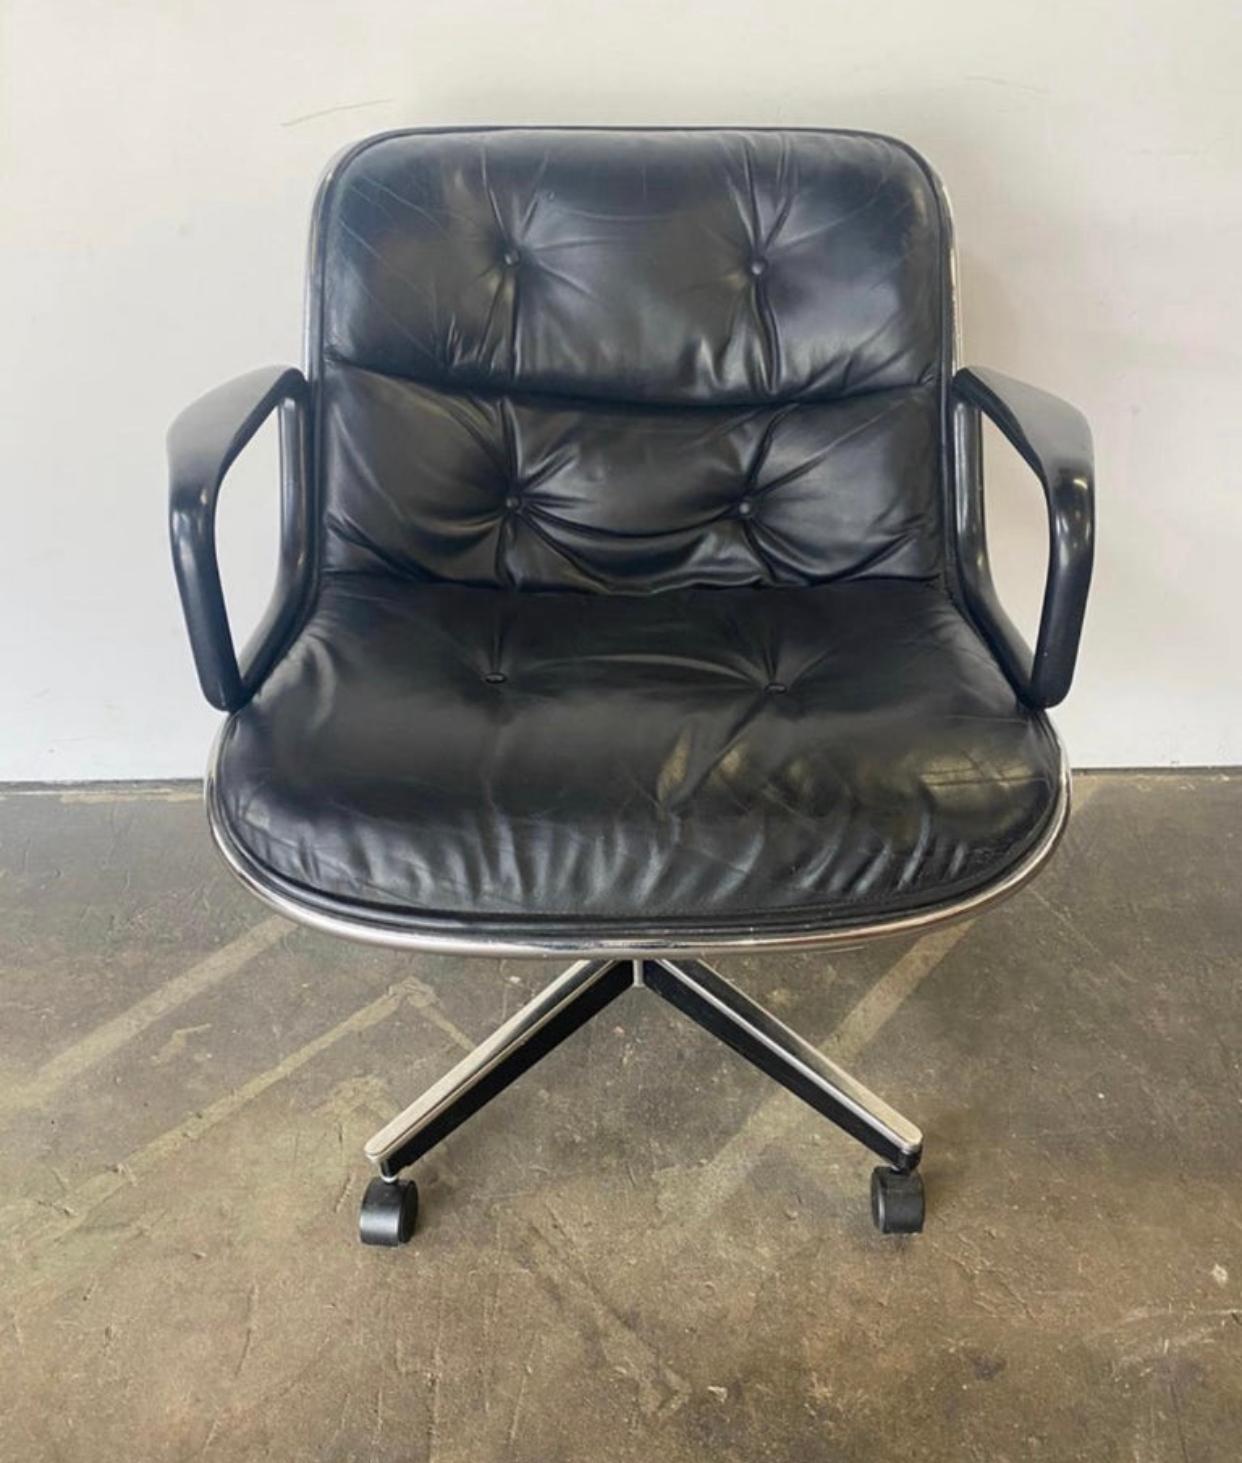 Vintage leather desk for office chair by Charles Pollock for Knoll. In good vintage condition. All wheels work as does swivel base. Height adjustable. Original leather in good condition. Extremely comfortable and can be seen in countless shows and